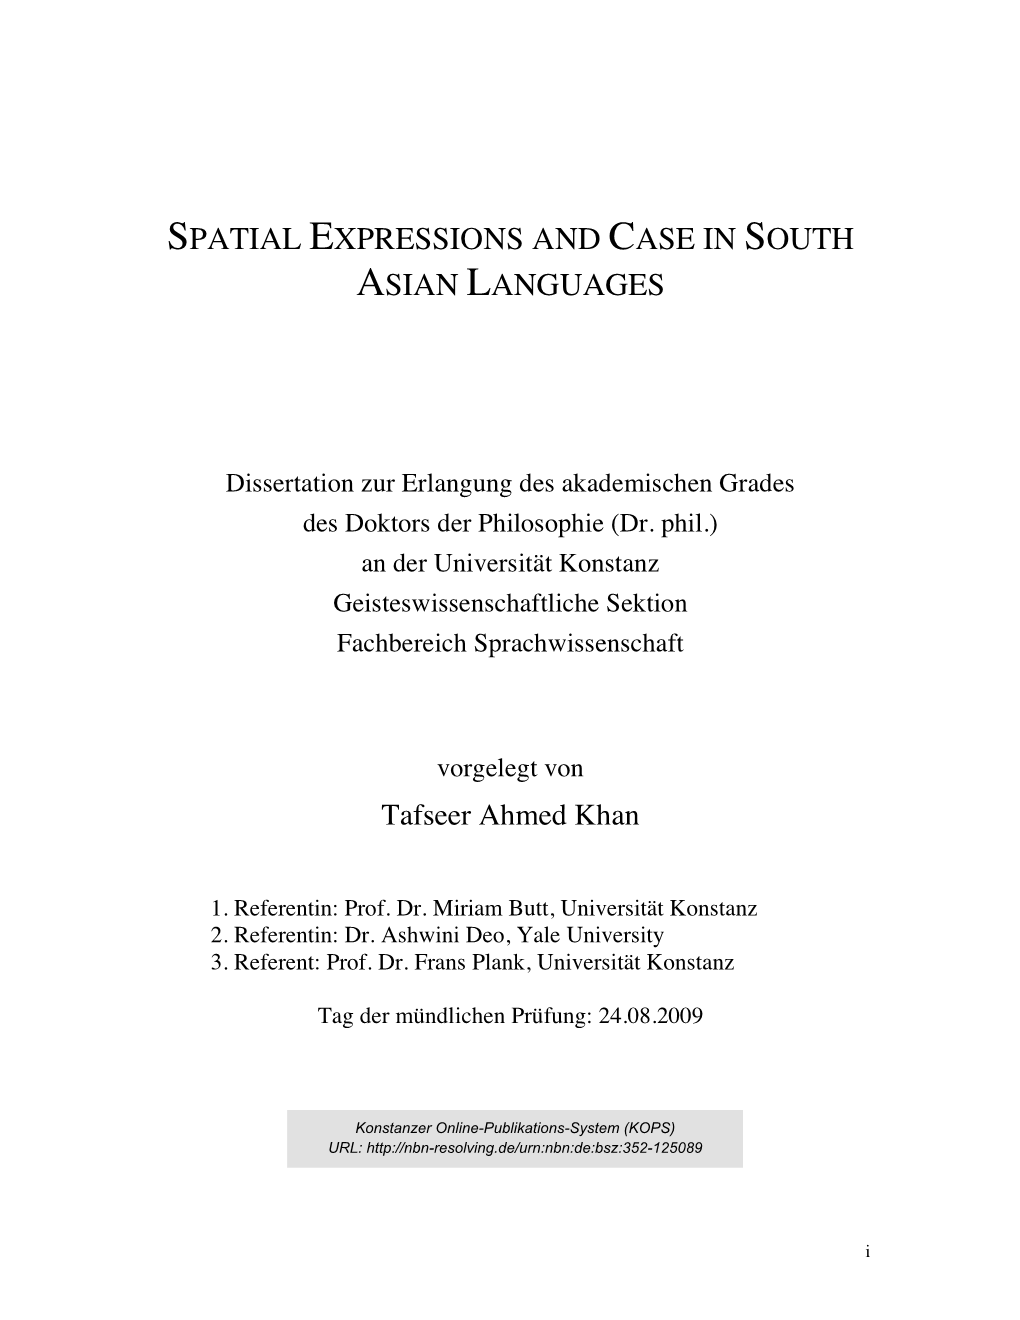 Tafseer Ahmed Khan: Spatial Expressions and Case in South